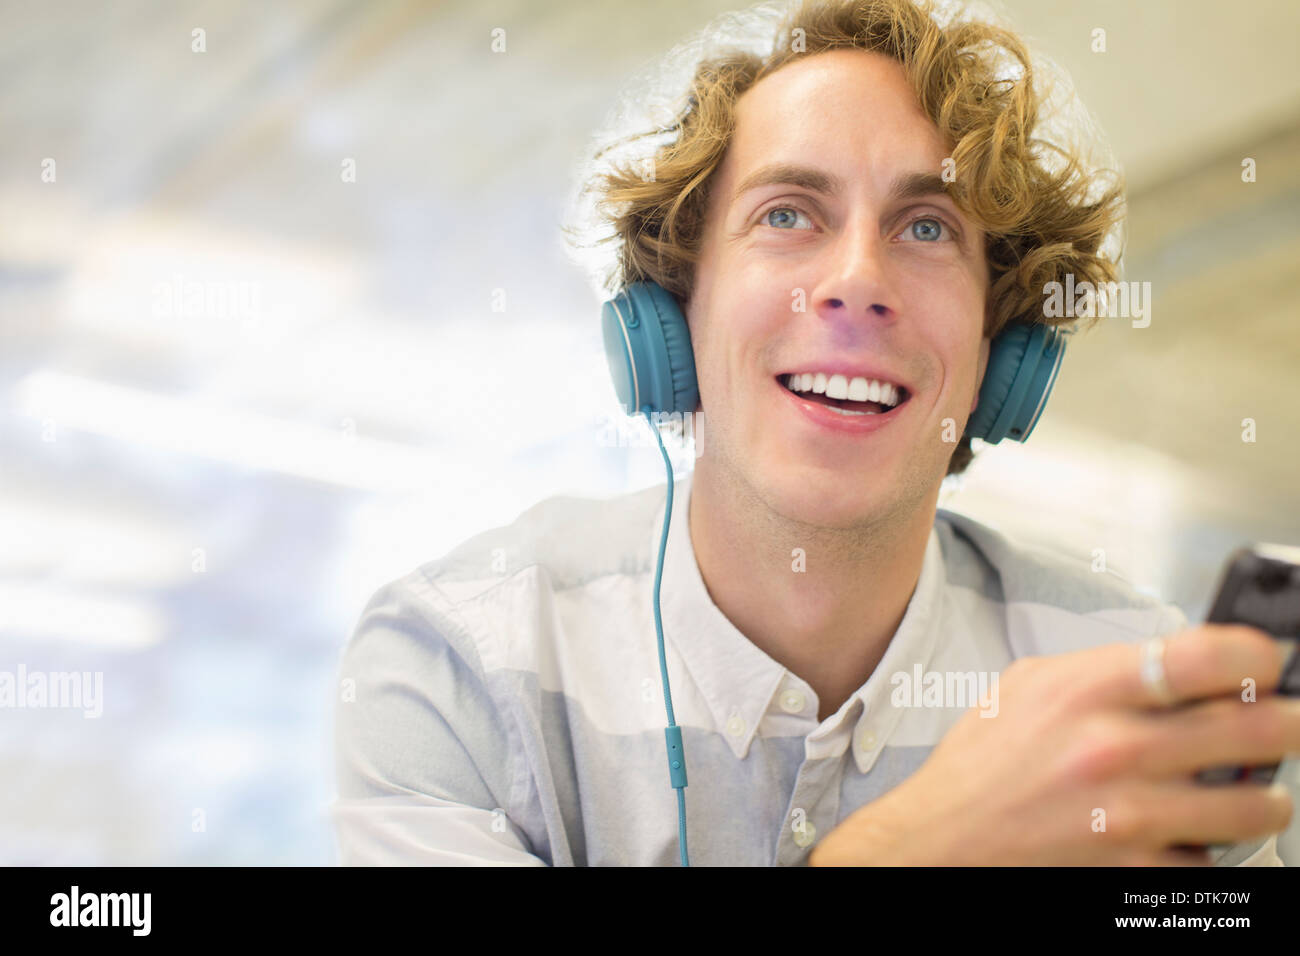 Man listening to headphones Banque D'Images